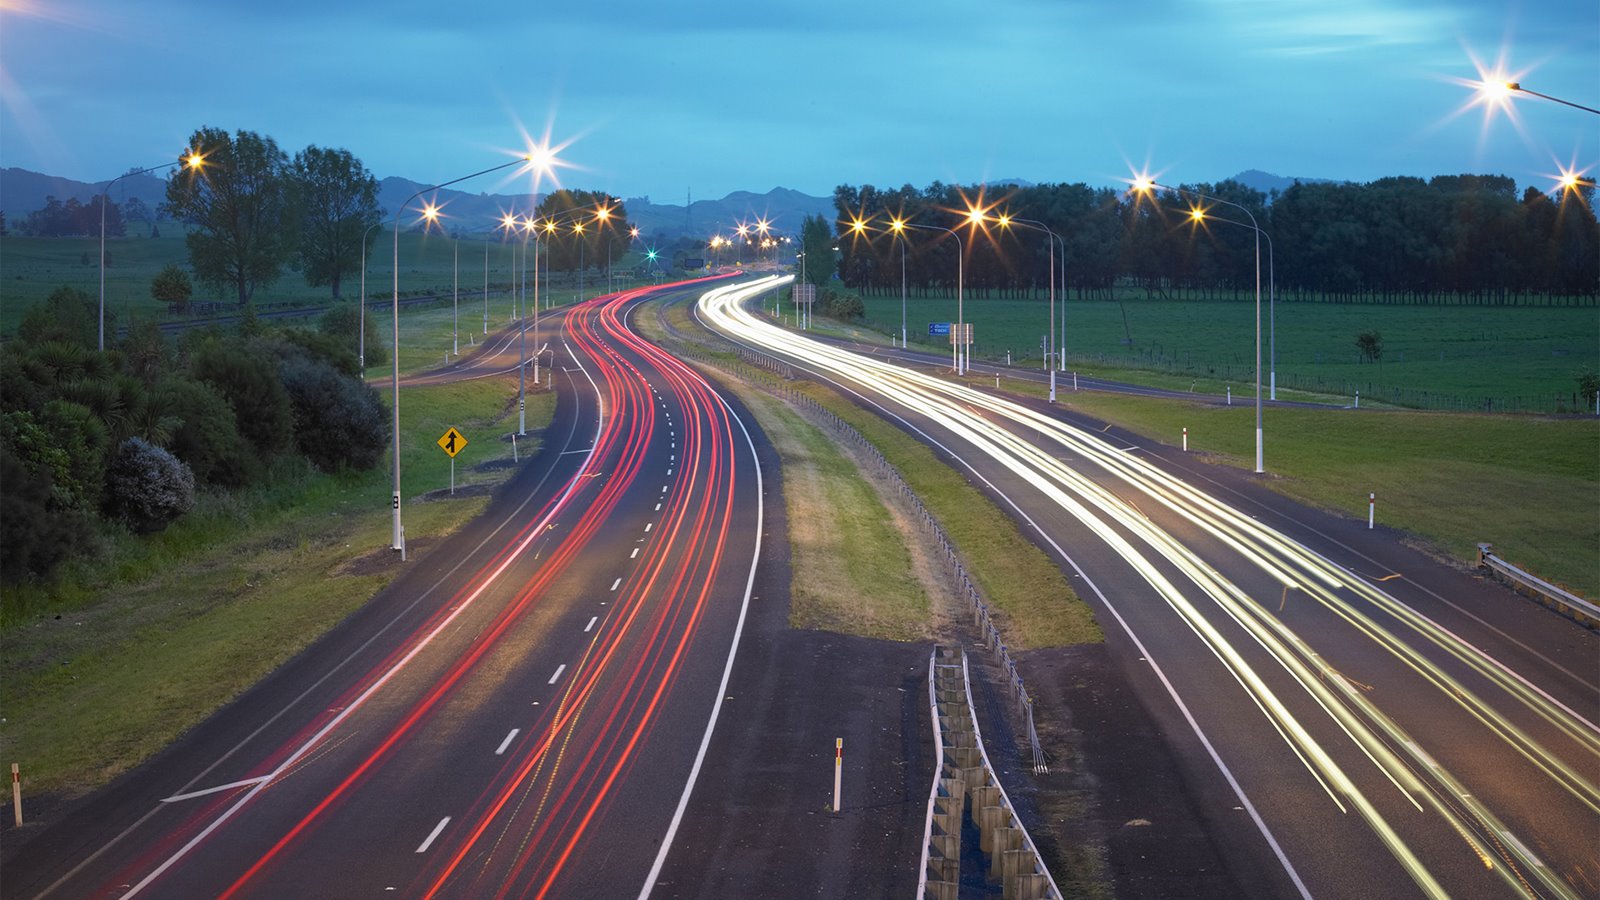 A timelapse photograph of the Waikato Expressway at night